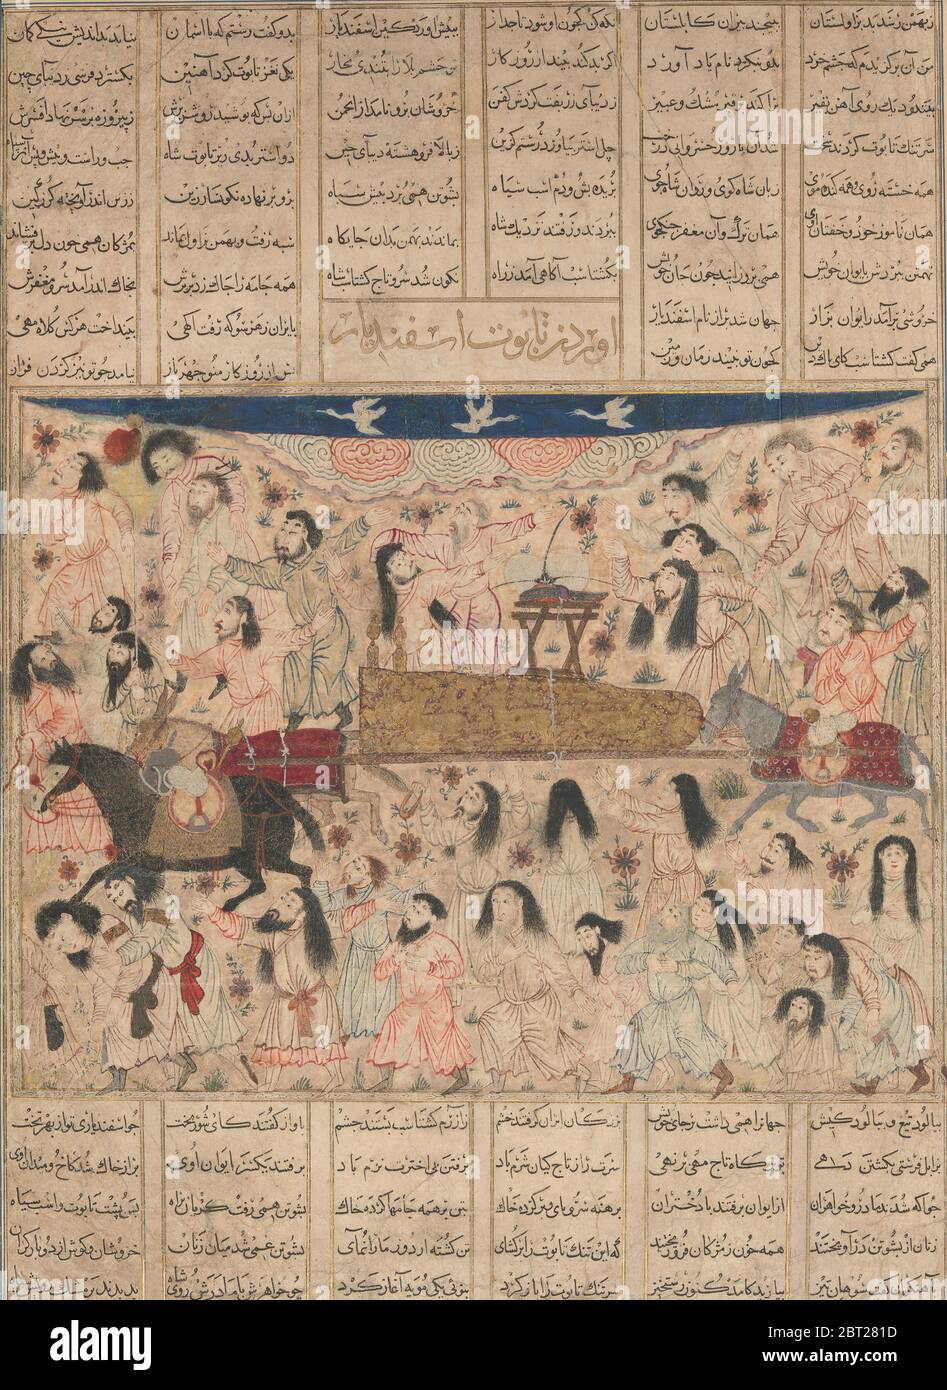 The Funeral of Isfandiyar, Folio from a Shahnama (Book of Kings), 1330s. Stock Photo